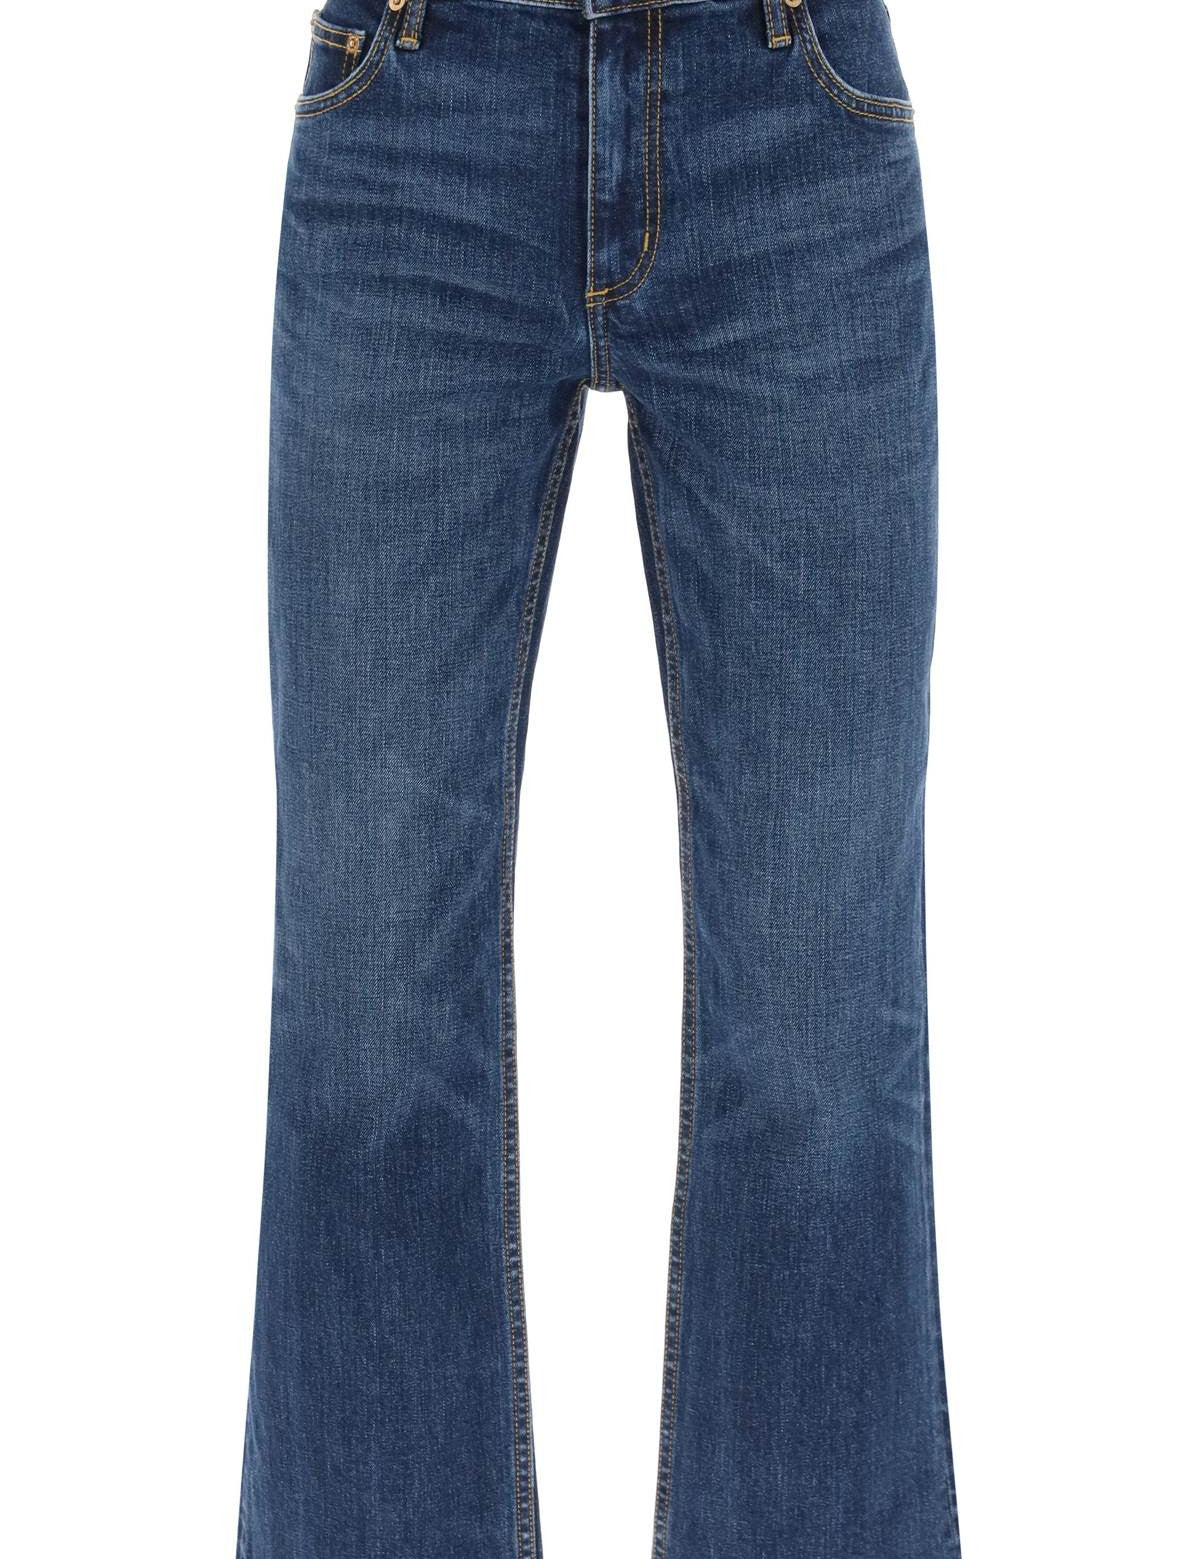 tory-burch-cropped-flared-jeans.jpg